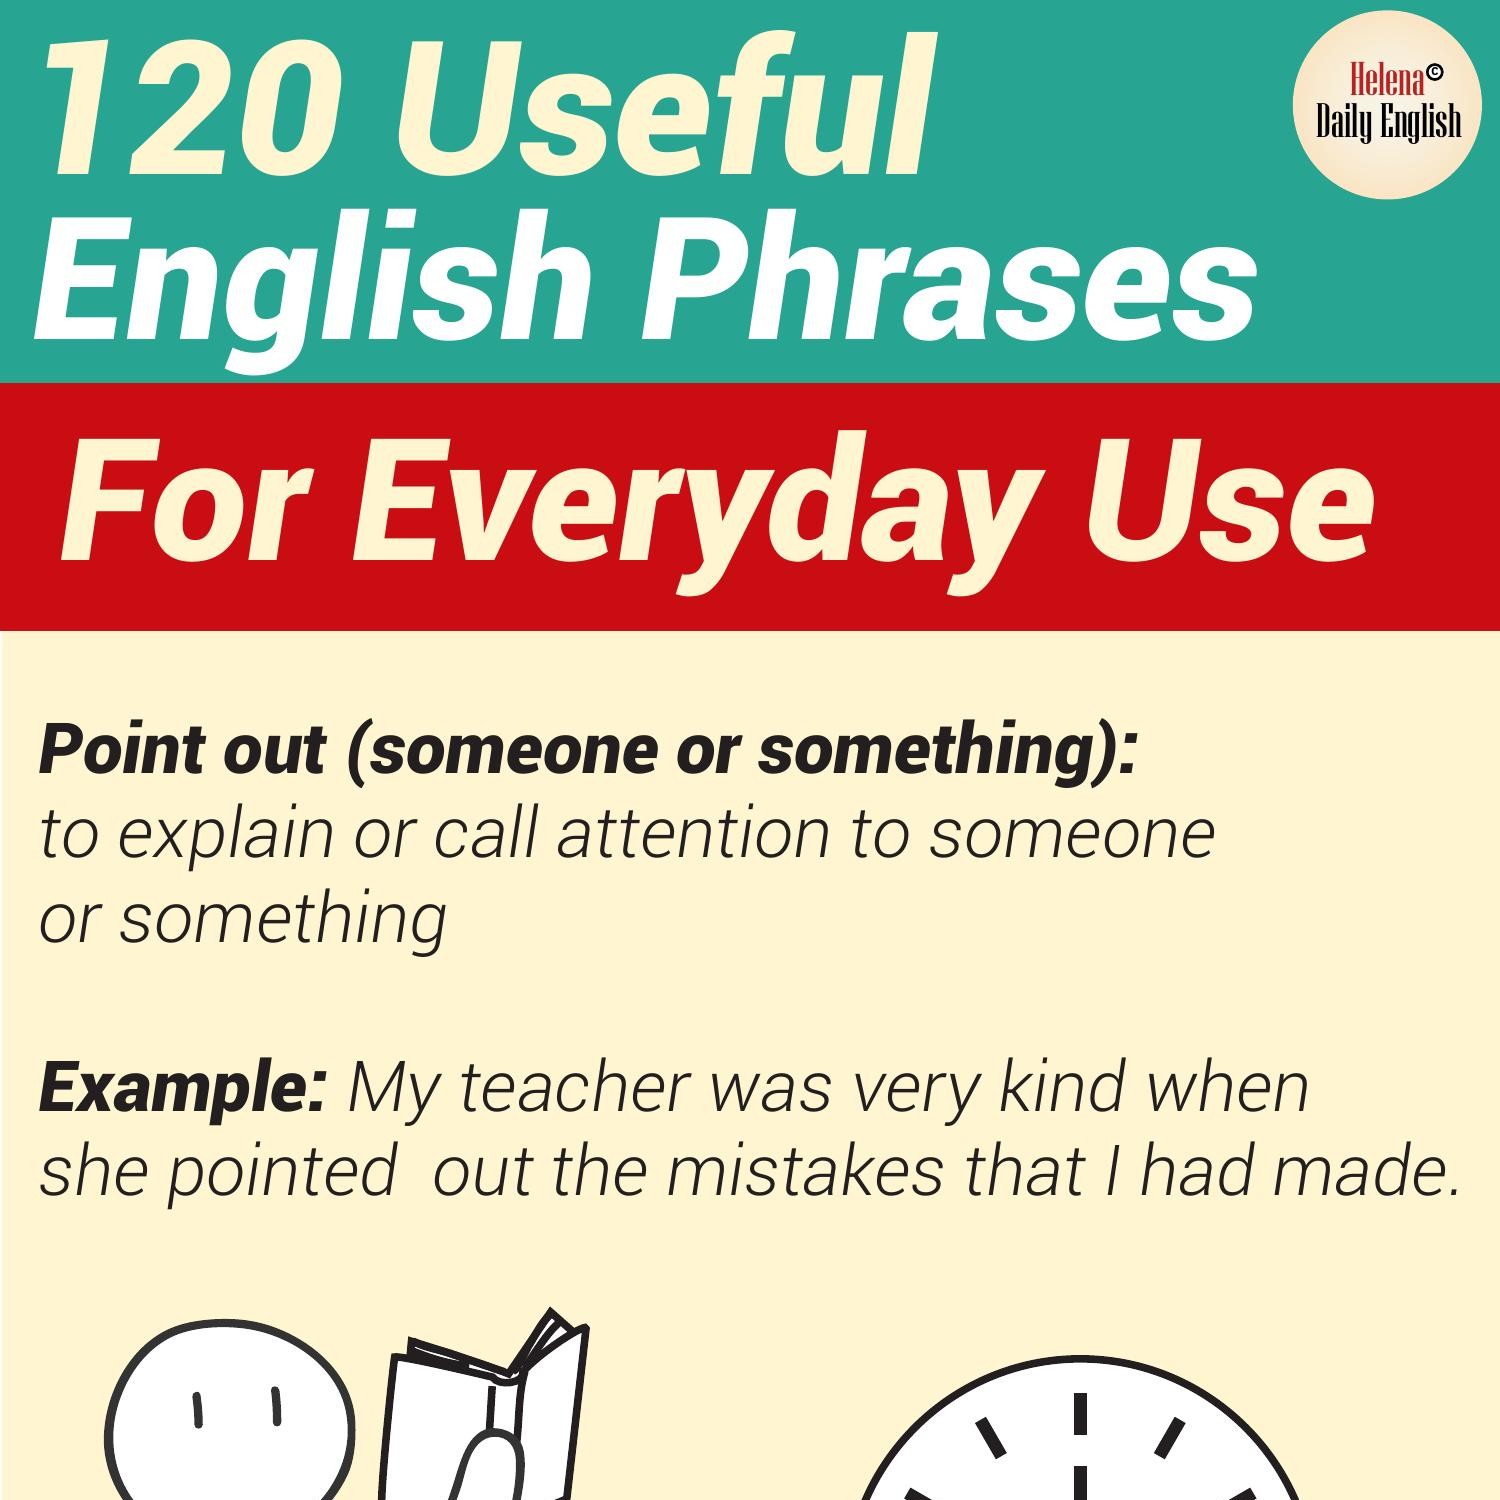 120 Useful English Phrases for Everyday Use.pdf | DocDroid